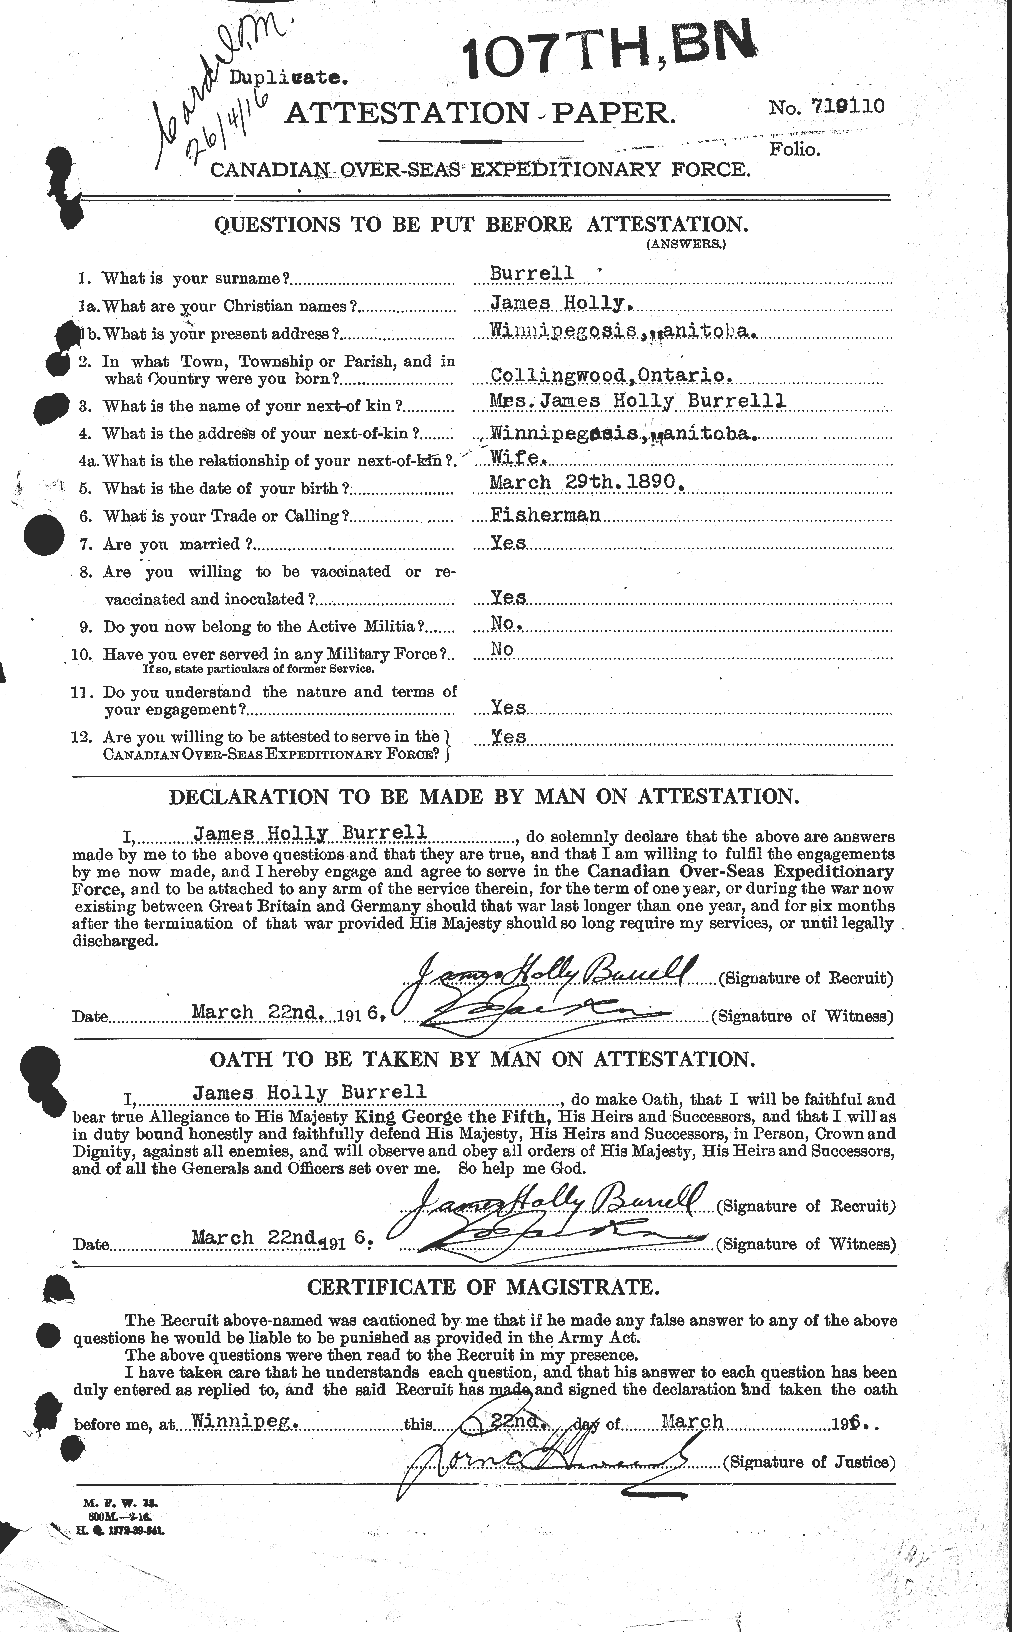 Personnel Records of the First World War - CEF 273981a